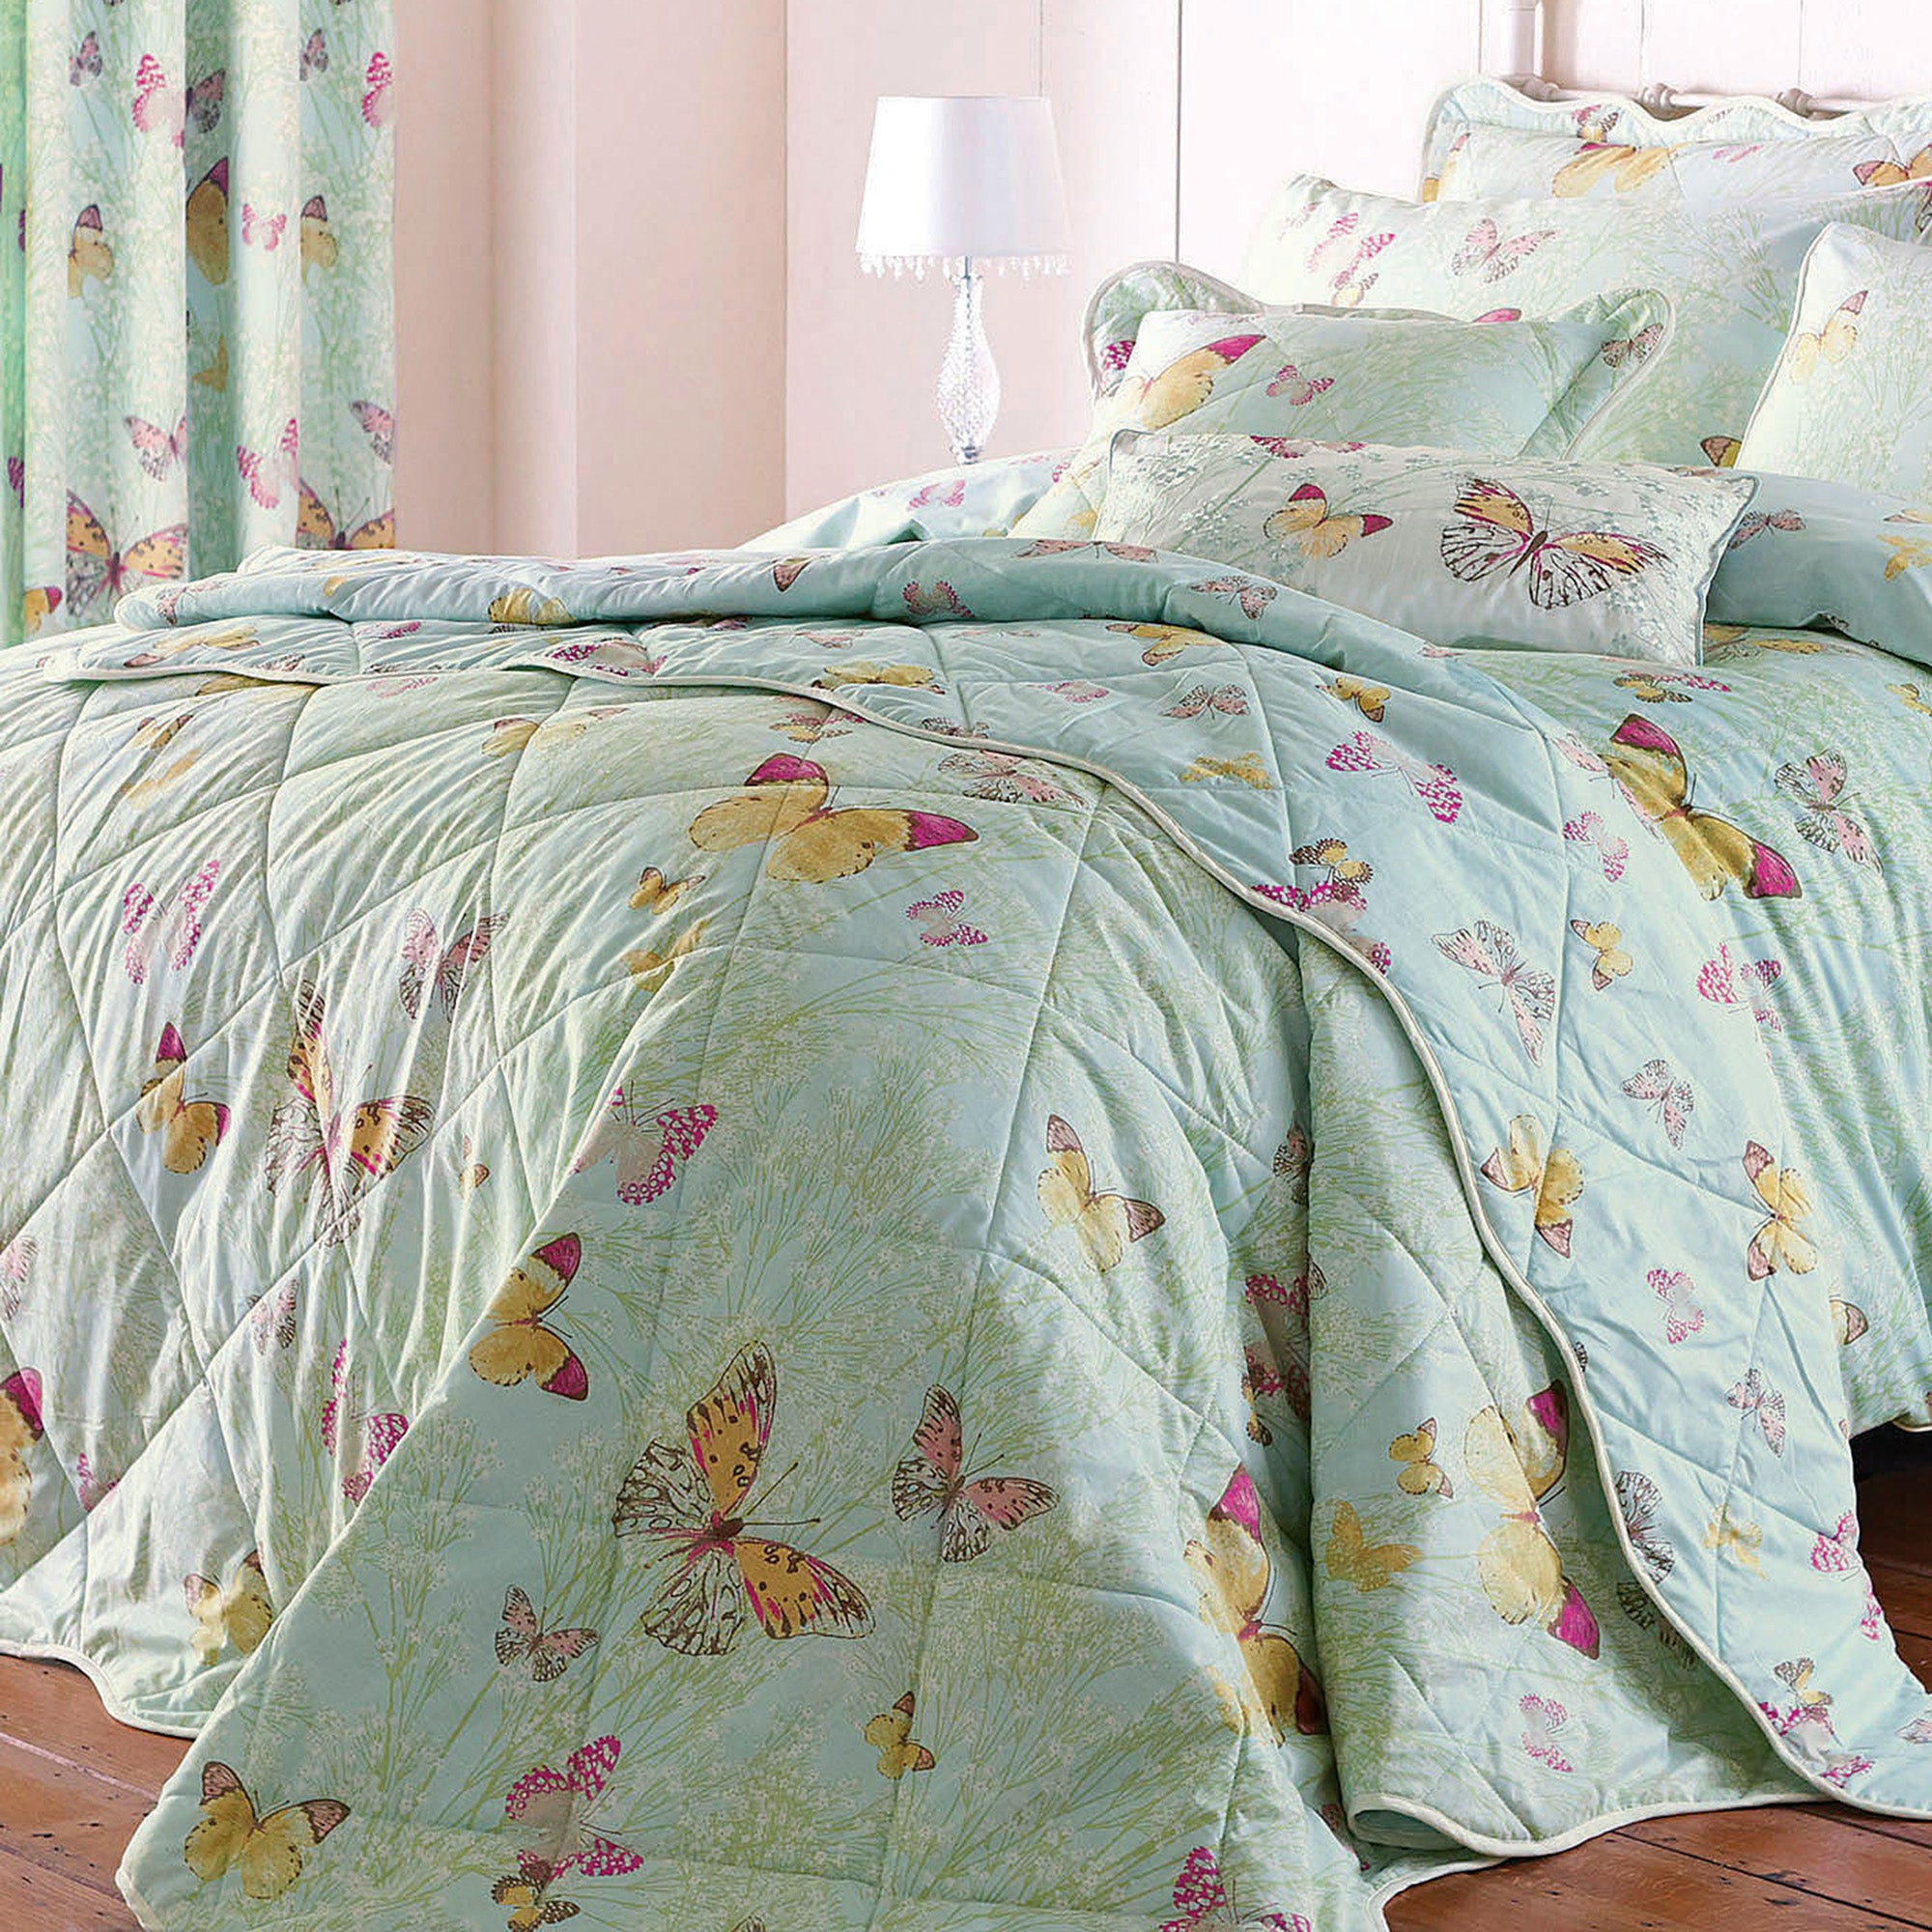 Bedspreads & Bed Throws | Bed Runners | Dunelm - Page 4